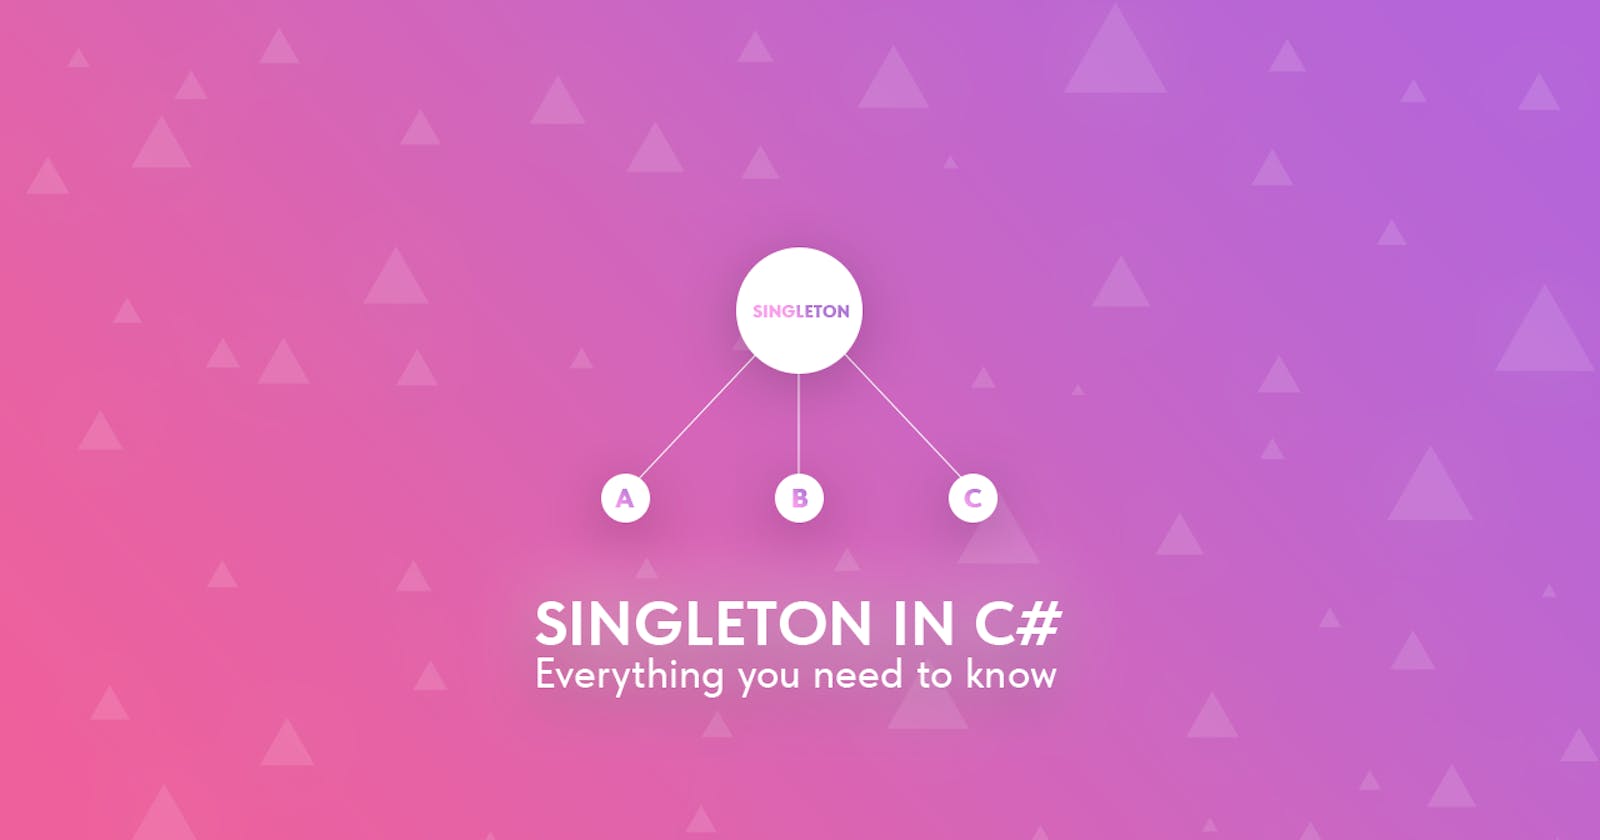 Everything you need to know about Singleton in C#